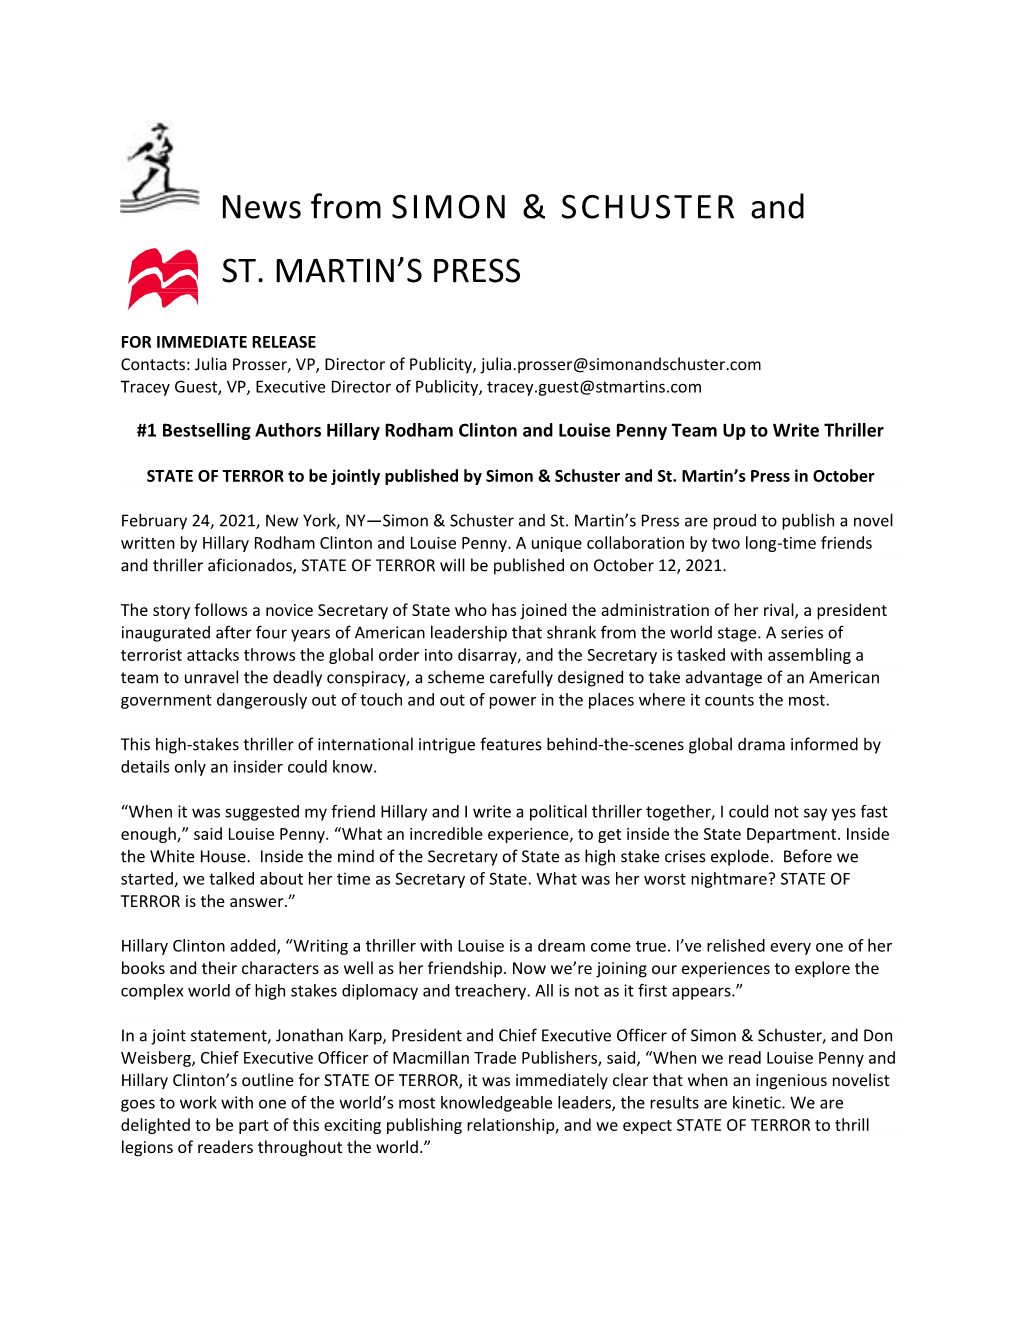 News from SIMON & SCHUSTER and ST. MARTIN's PRESS